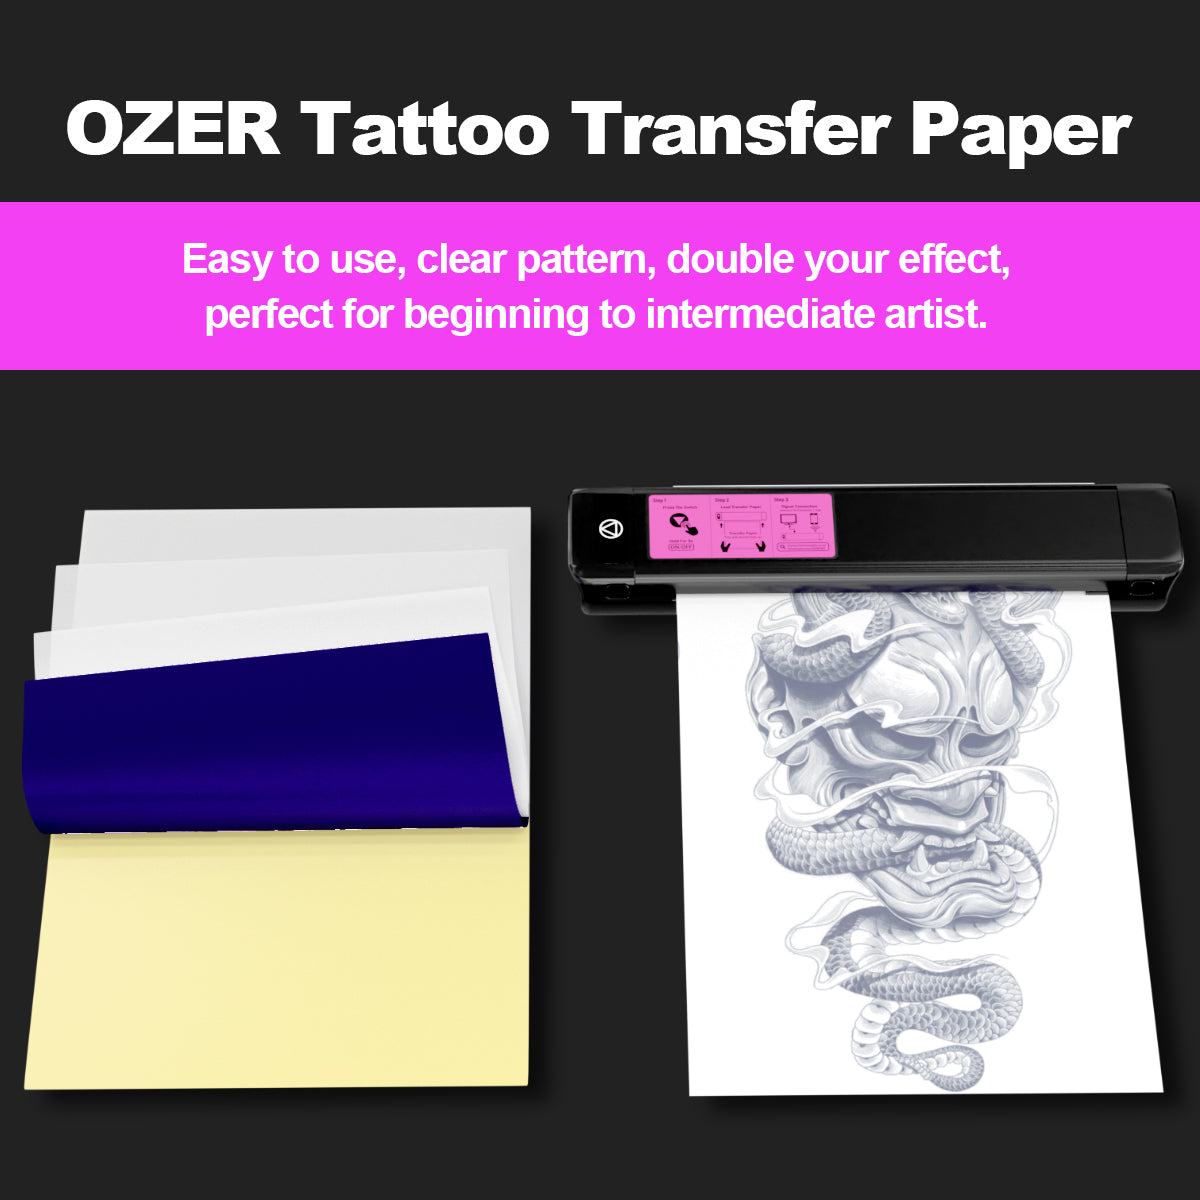 Ozer Thermal Paper